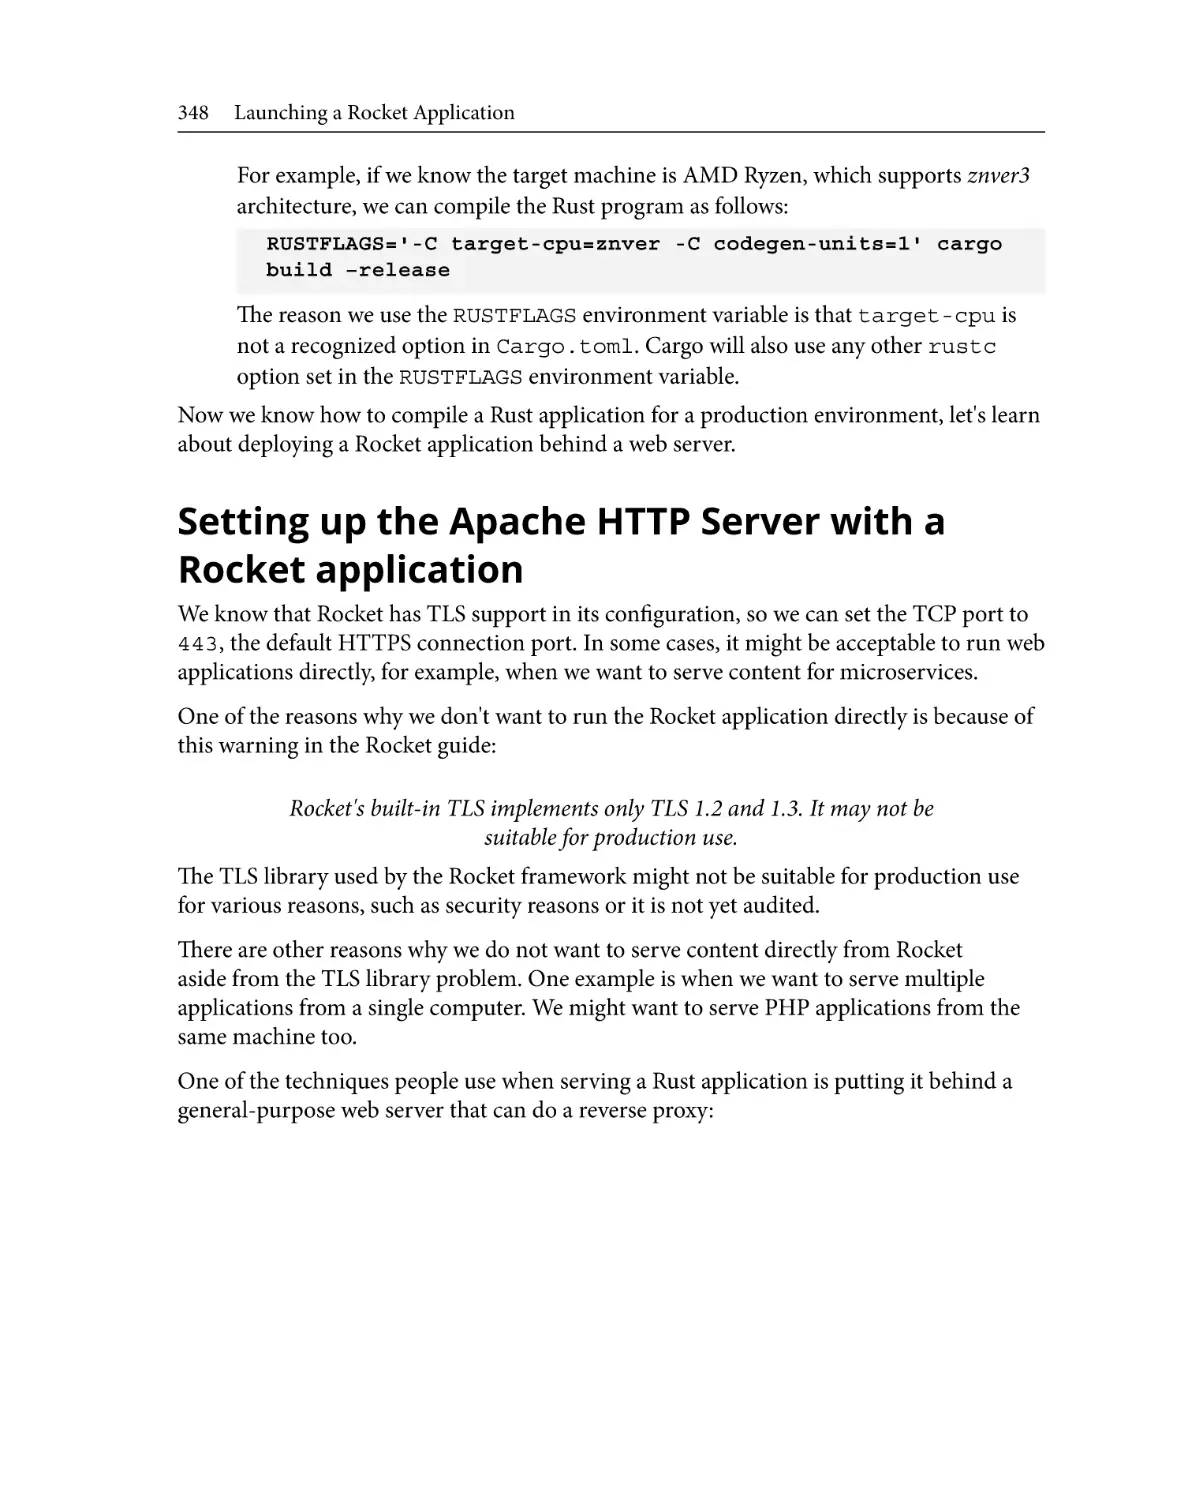 Setting up the Apache HTTP Server with a Rocket application